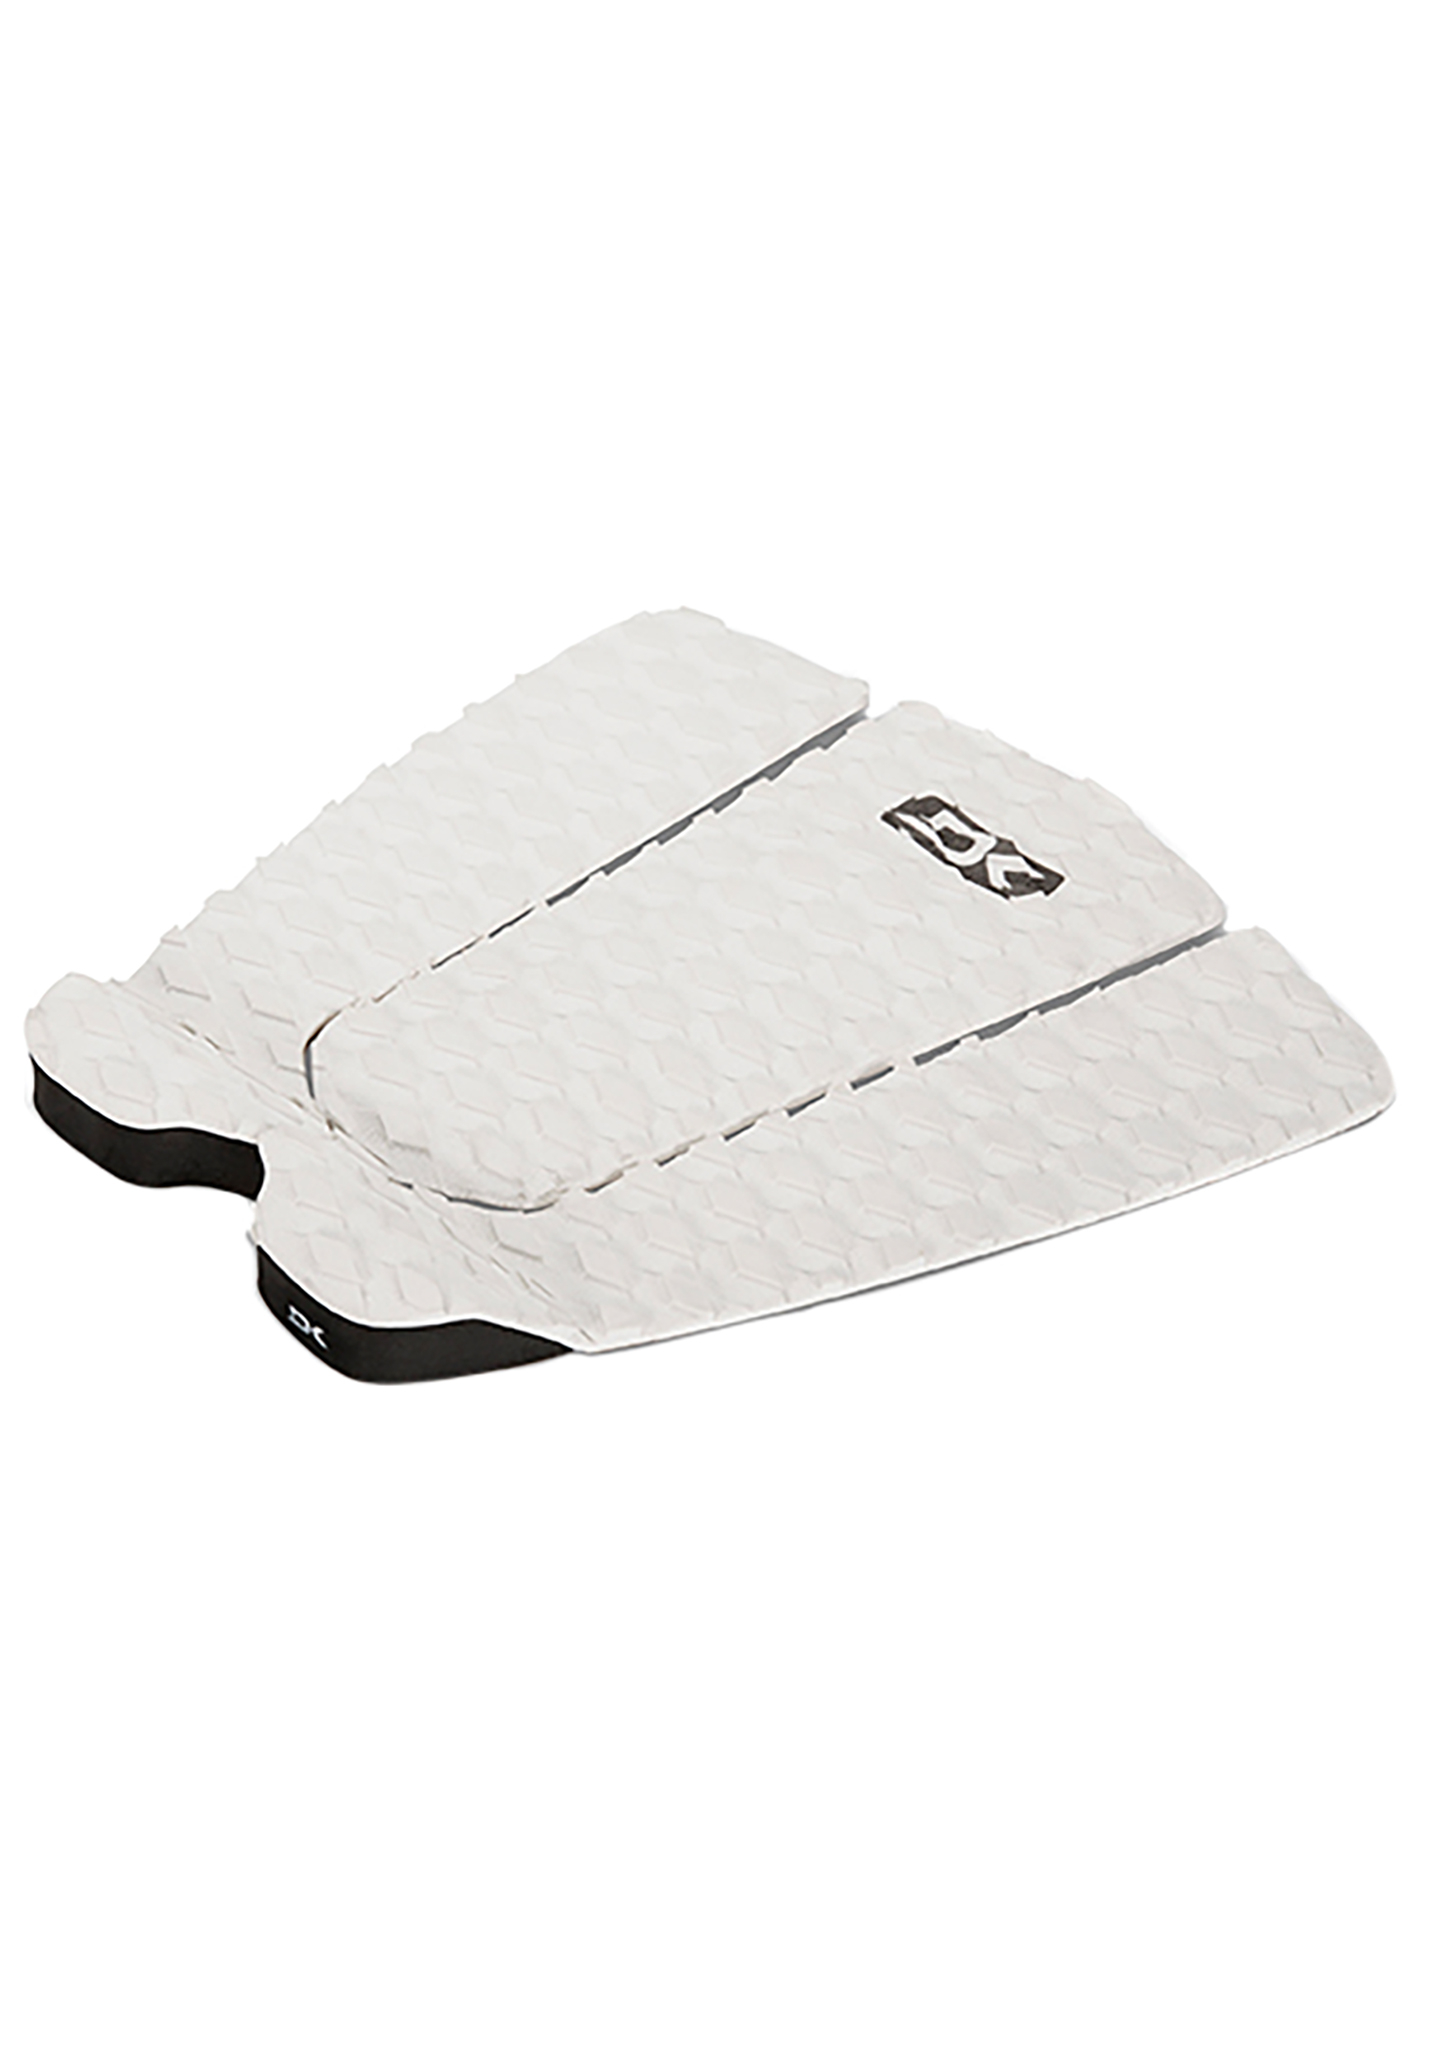 Dakine Andy Irons Pro Surf Pads weiß One Size